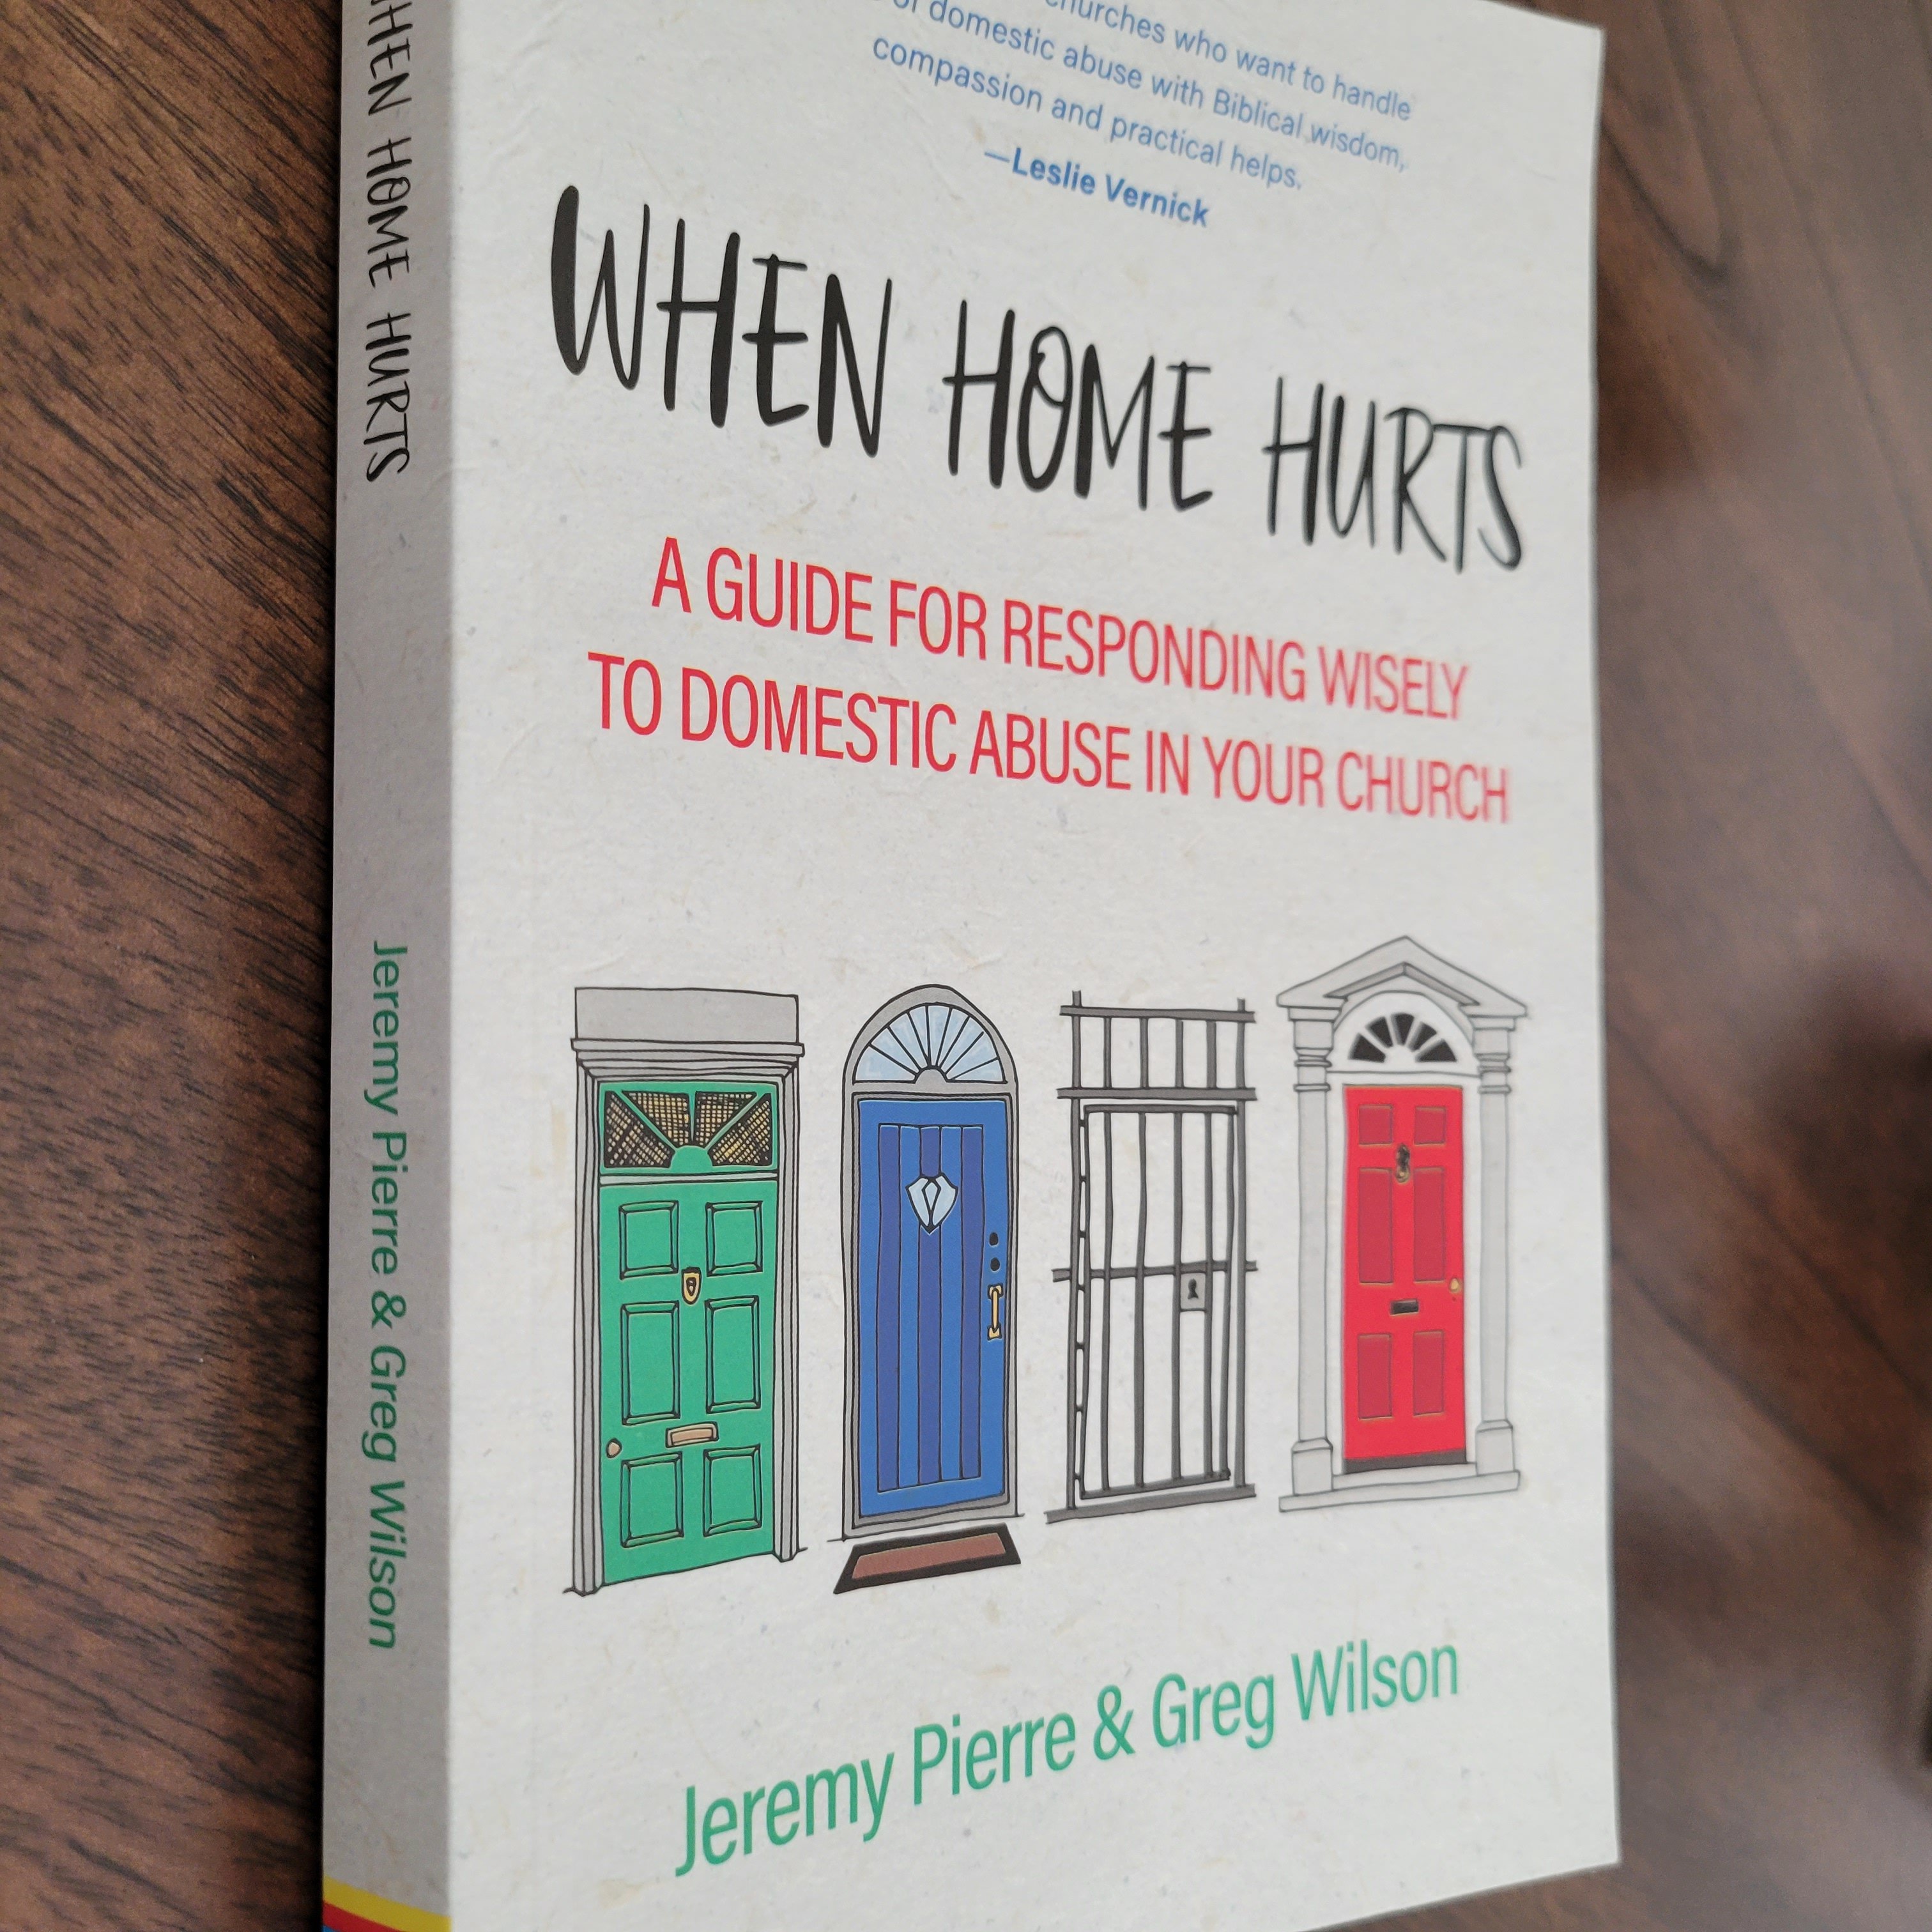 When Home Hurts by Greg A Wilson and Jeremy Pierre